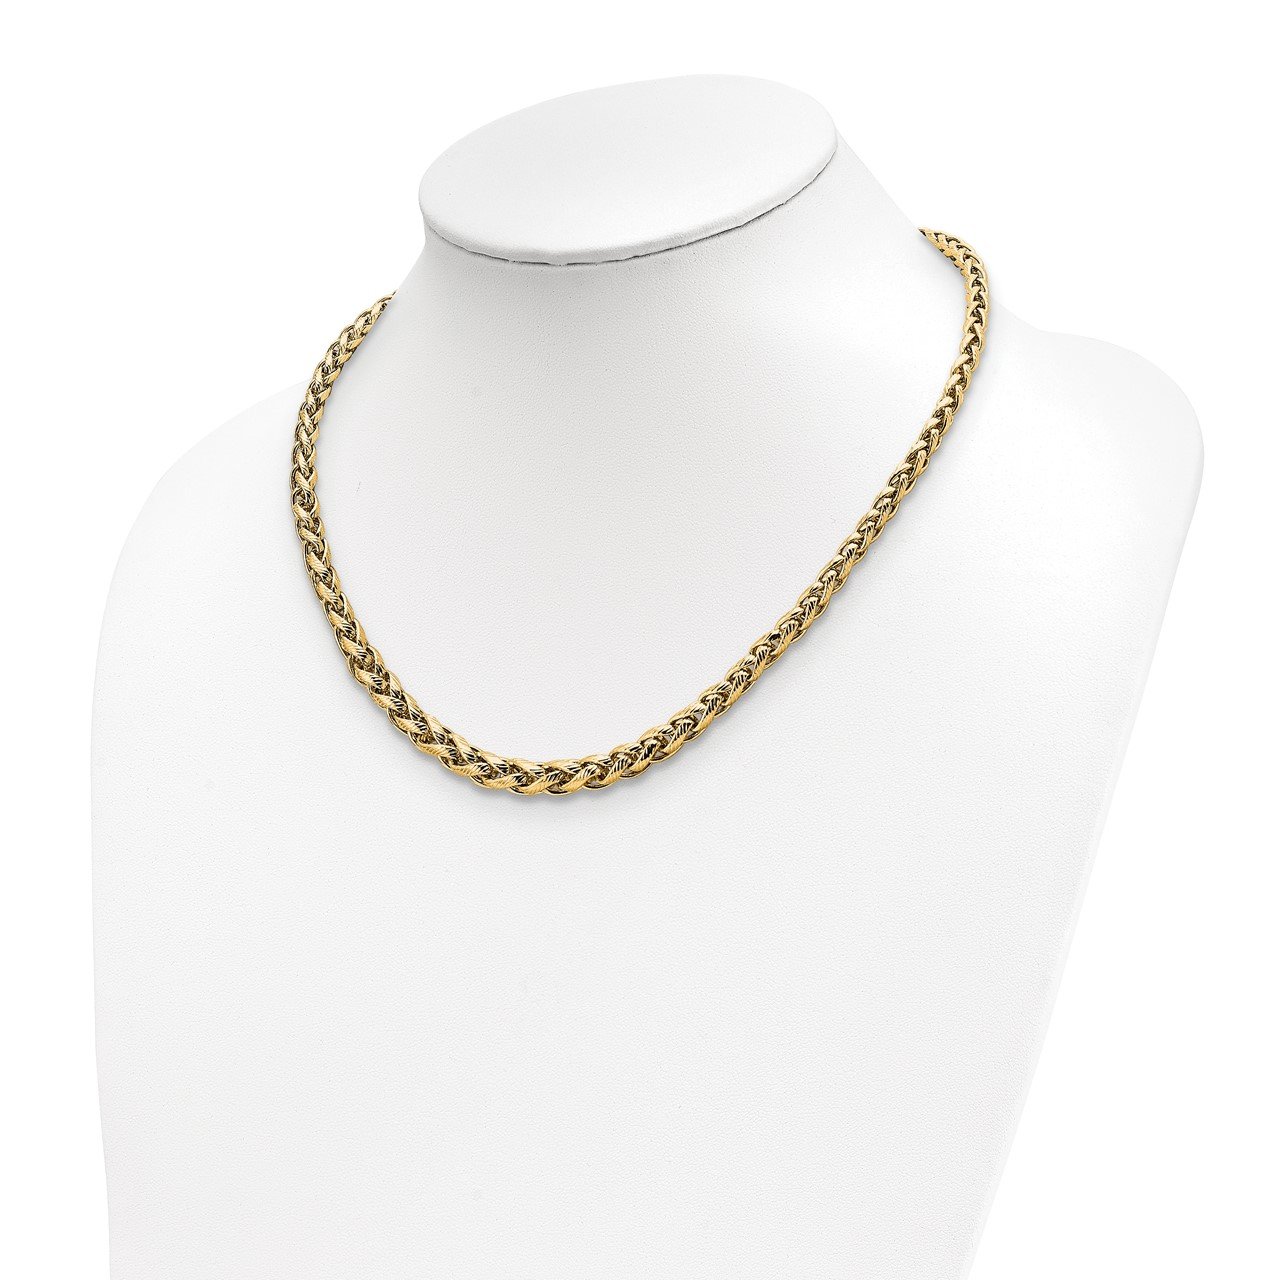 Leslie's 14k Polished and Textured with .5in ext Necklace-1